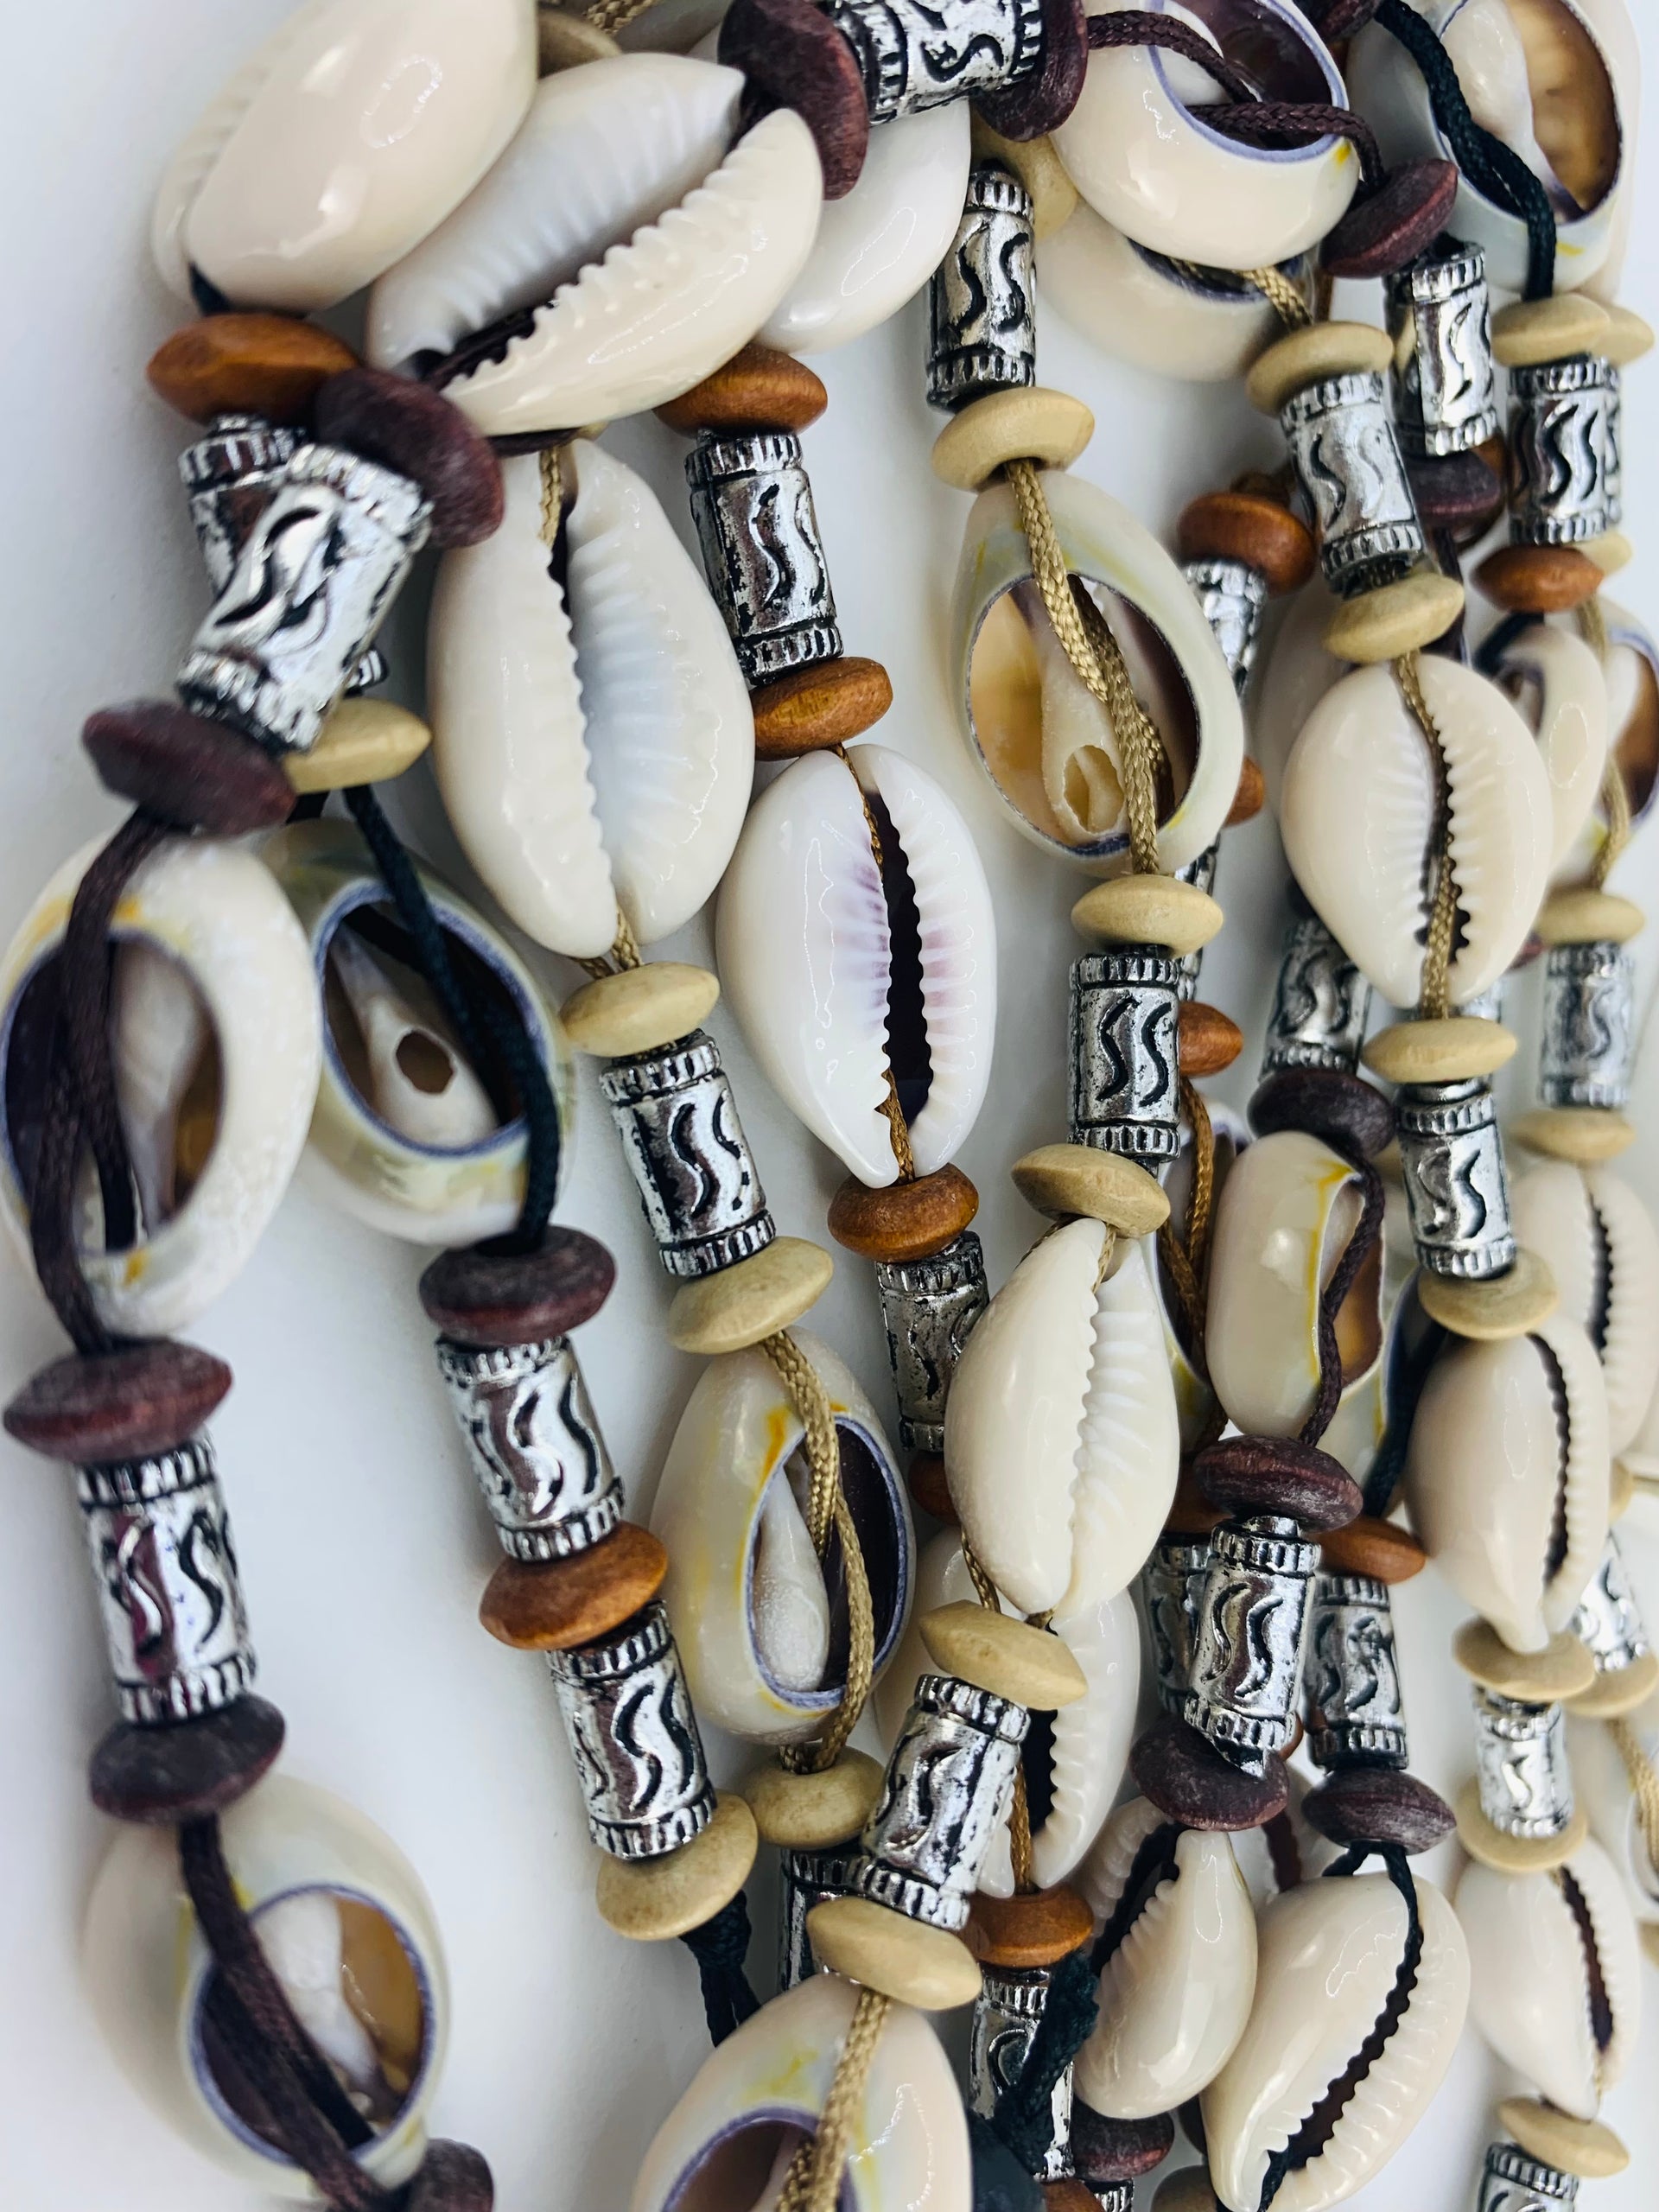 Cowrie Calico Beads Necklace